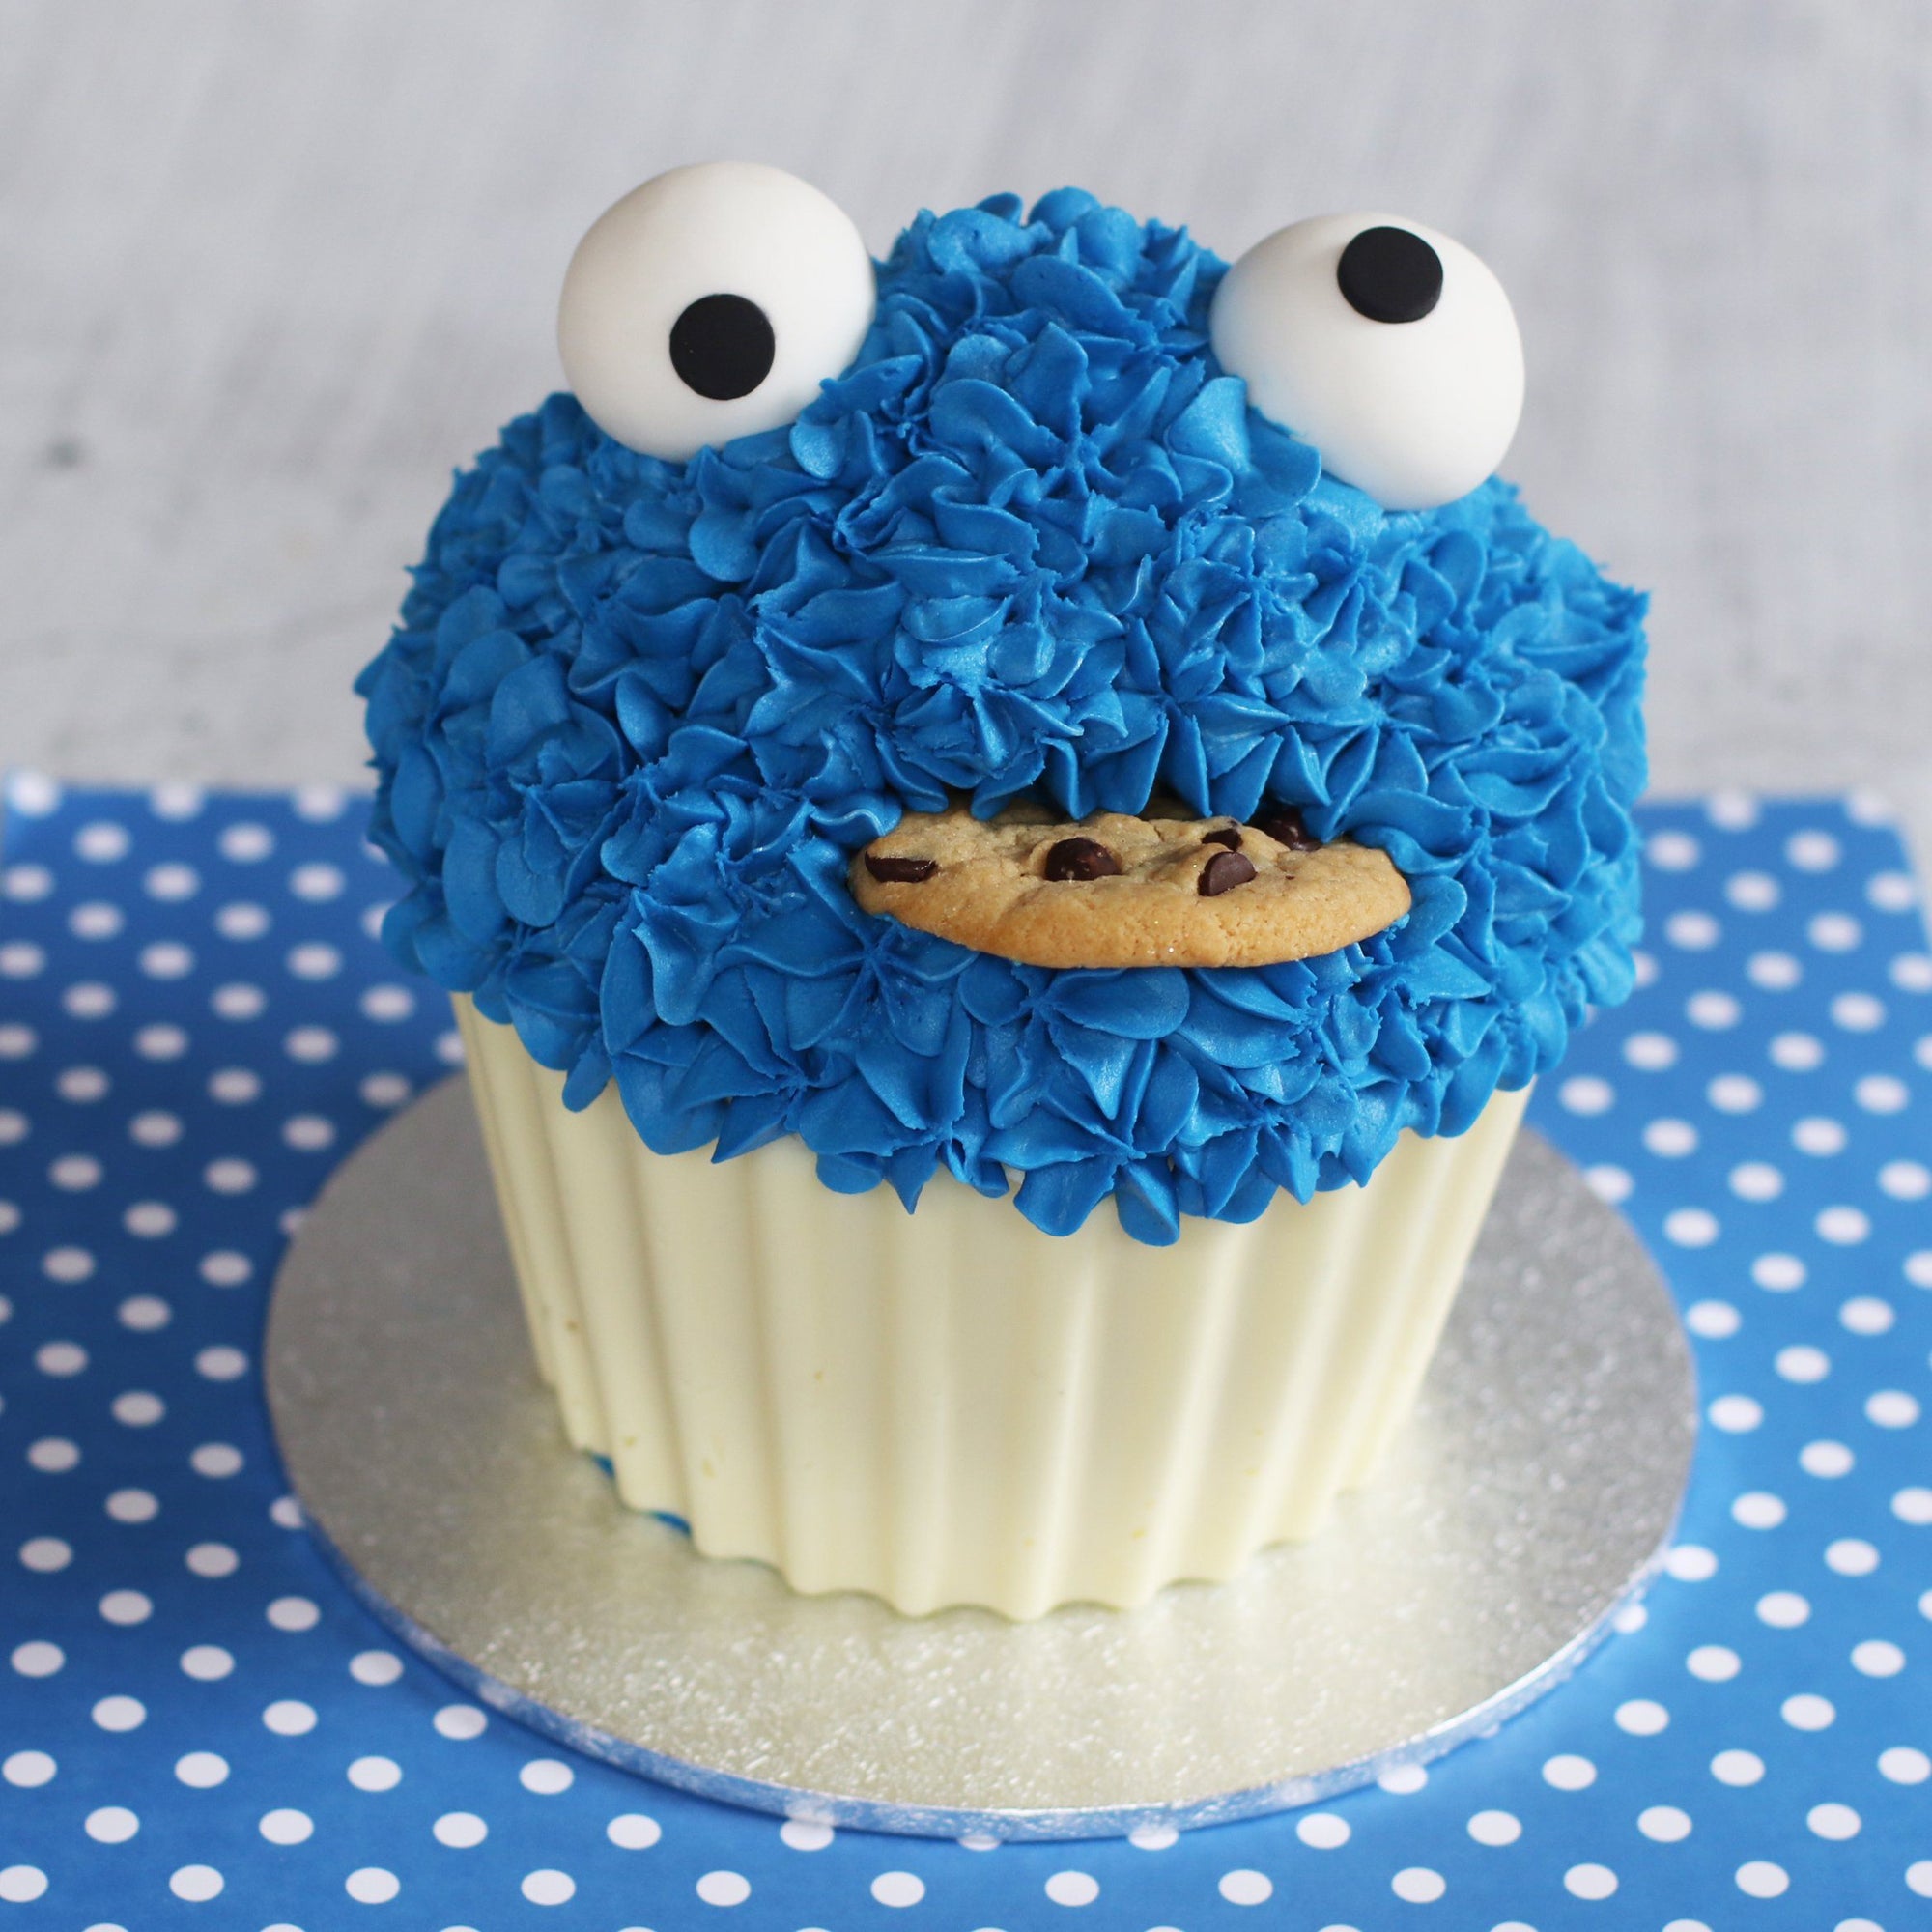 The Cookie Monster Giant Cupcake Cakes The Cupcake Queens 